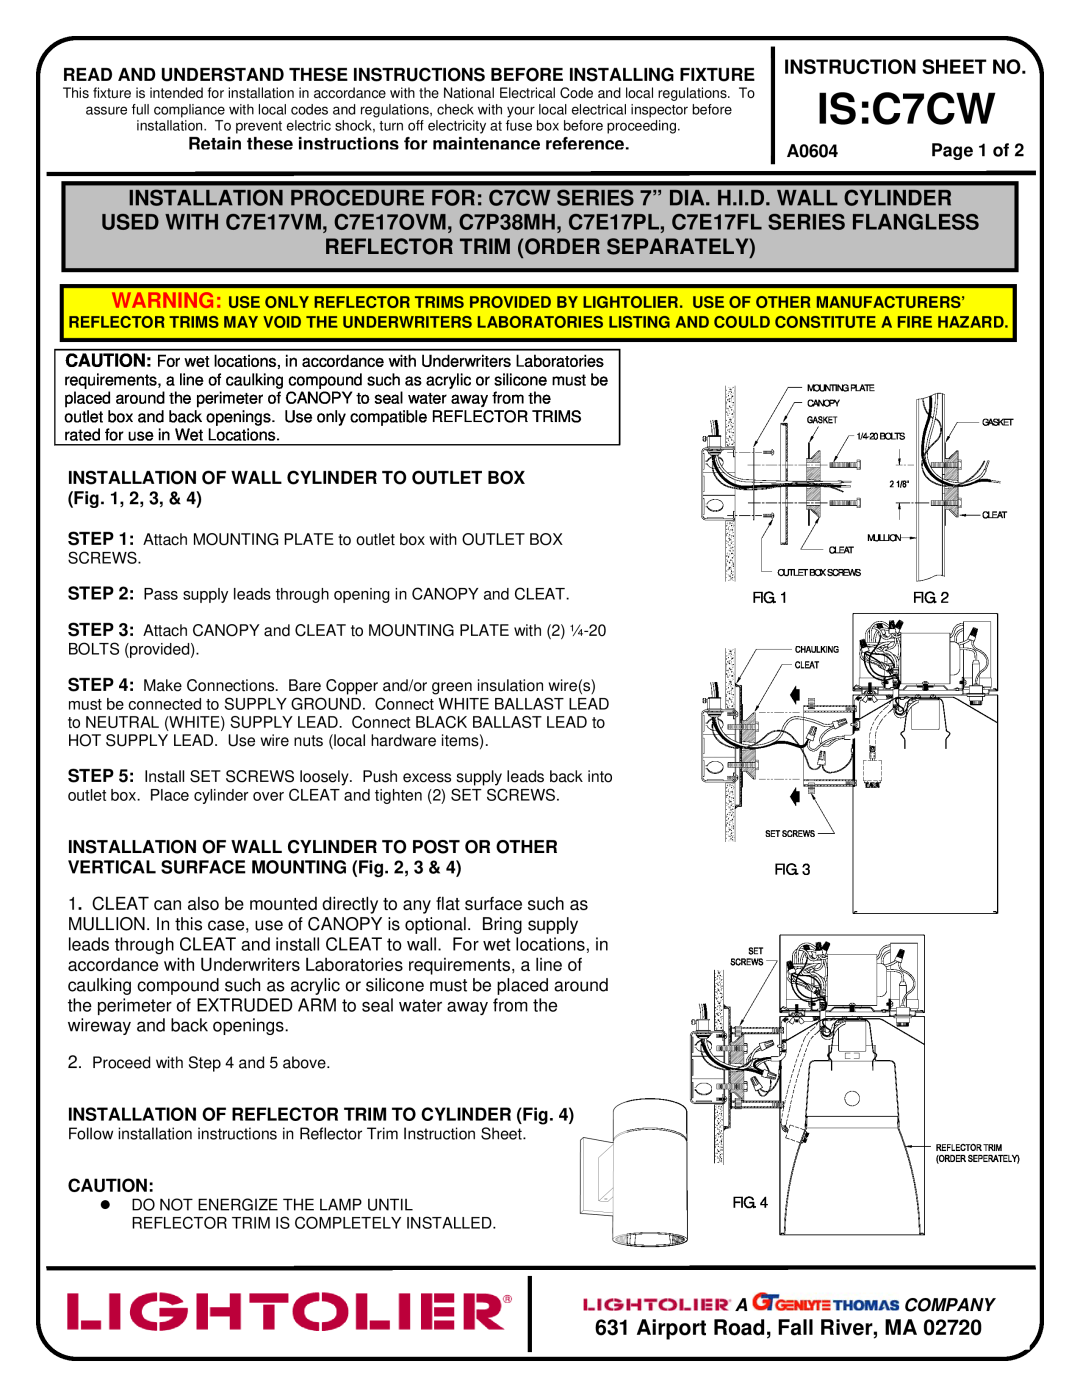 Lightolier instruction sheet IS C7CW, Reflector Trim Order Separately, Airport Road, Fall River, MA, A Company 